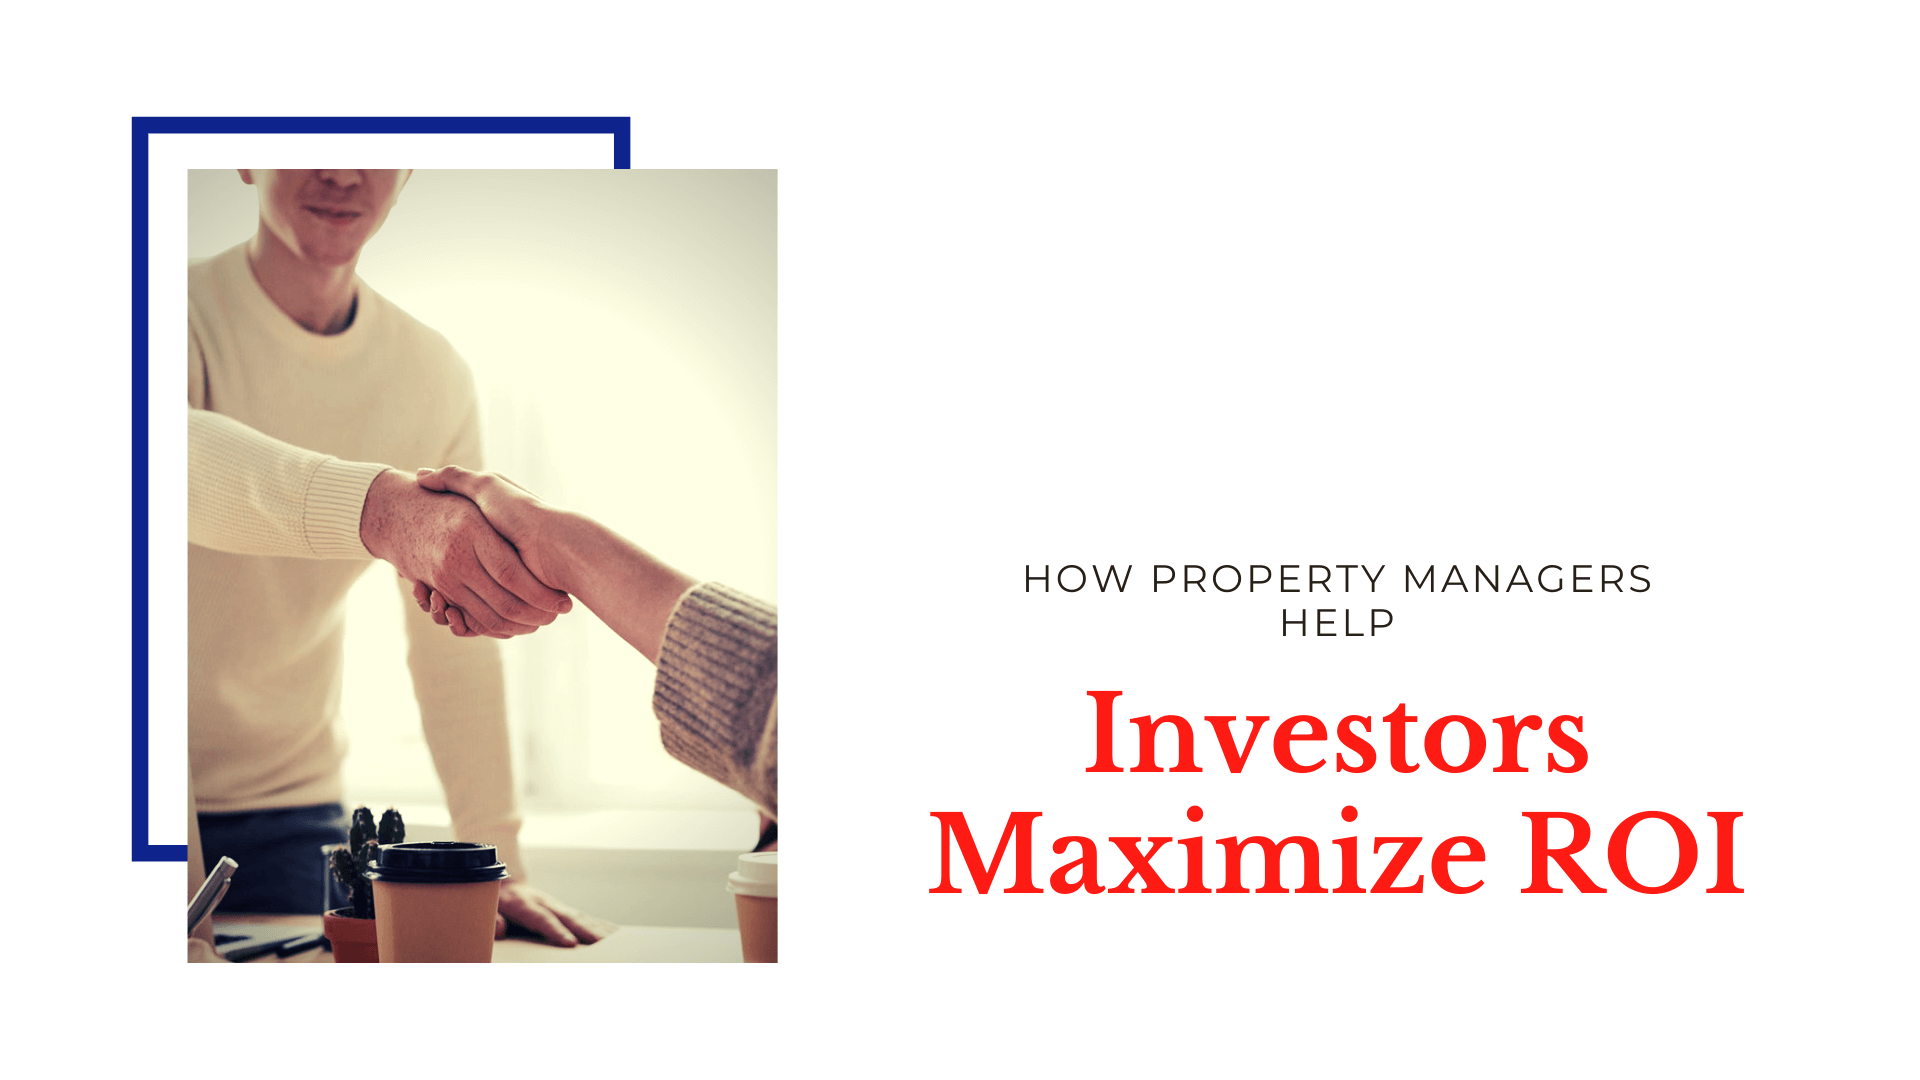 How Long Beach Property Managers Help Real Estate Investors Maximize ROI